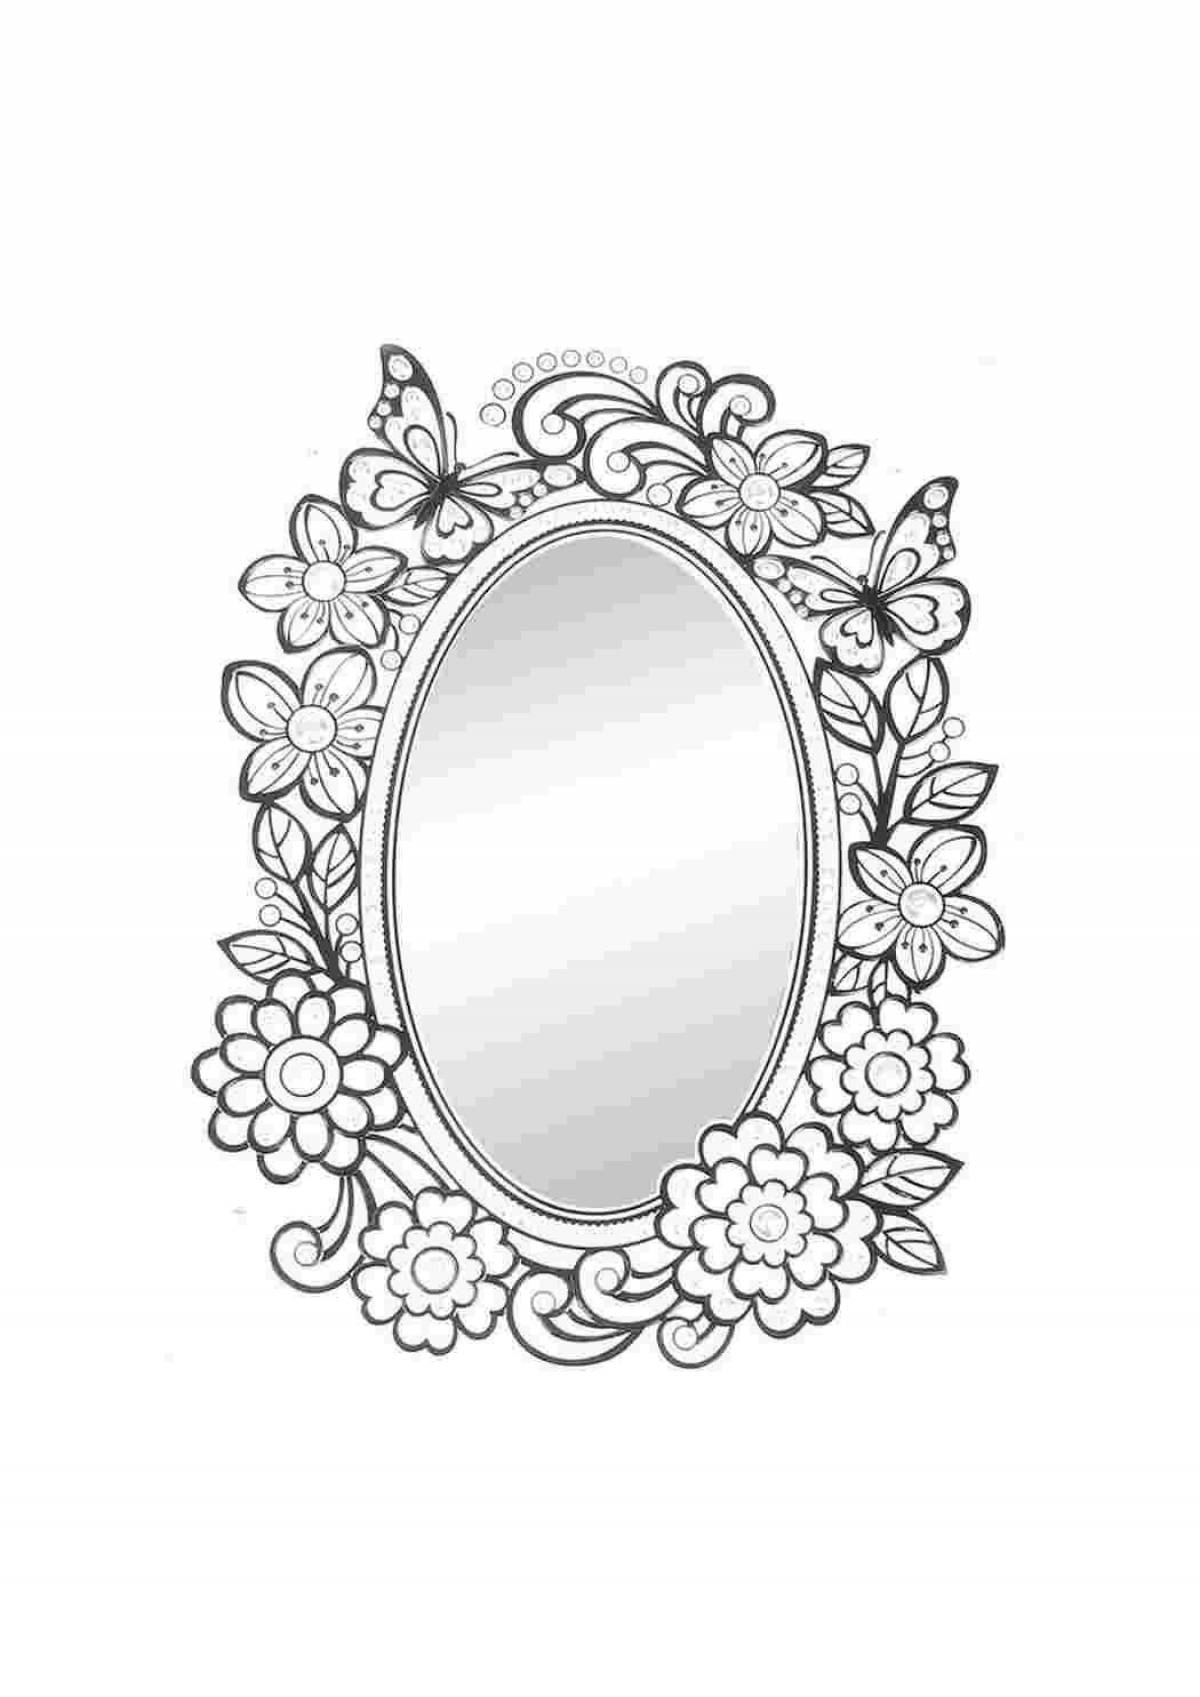 Polished mirror coloring page